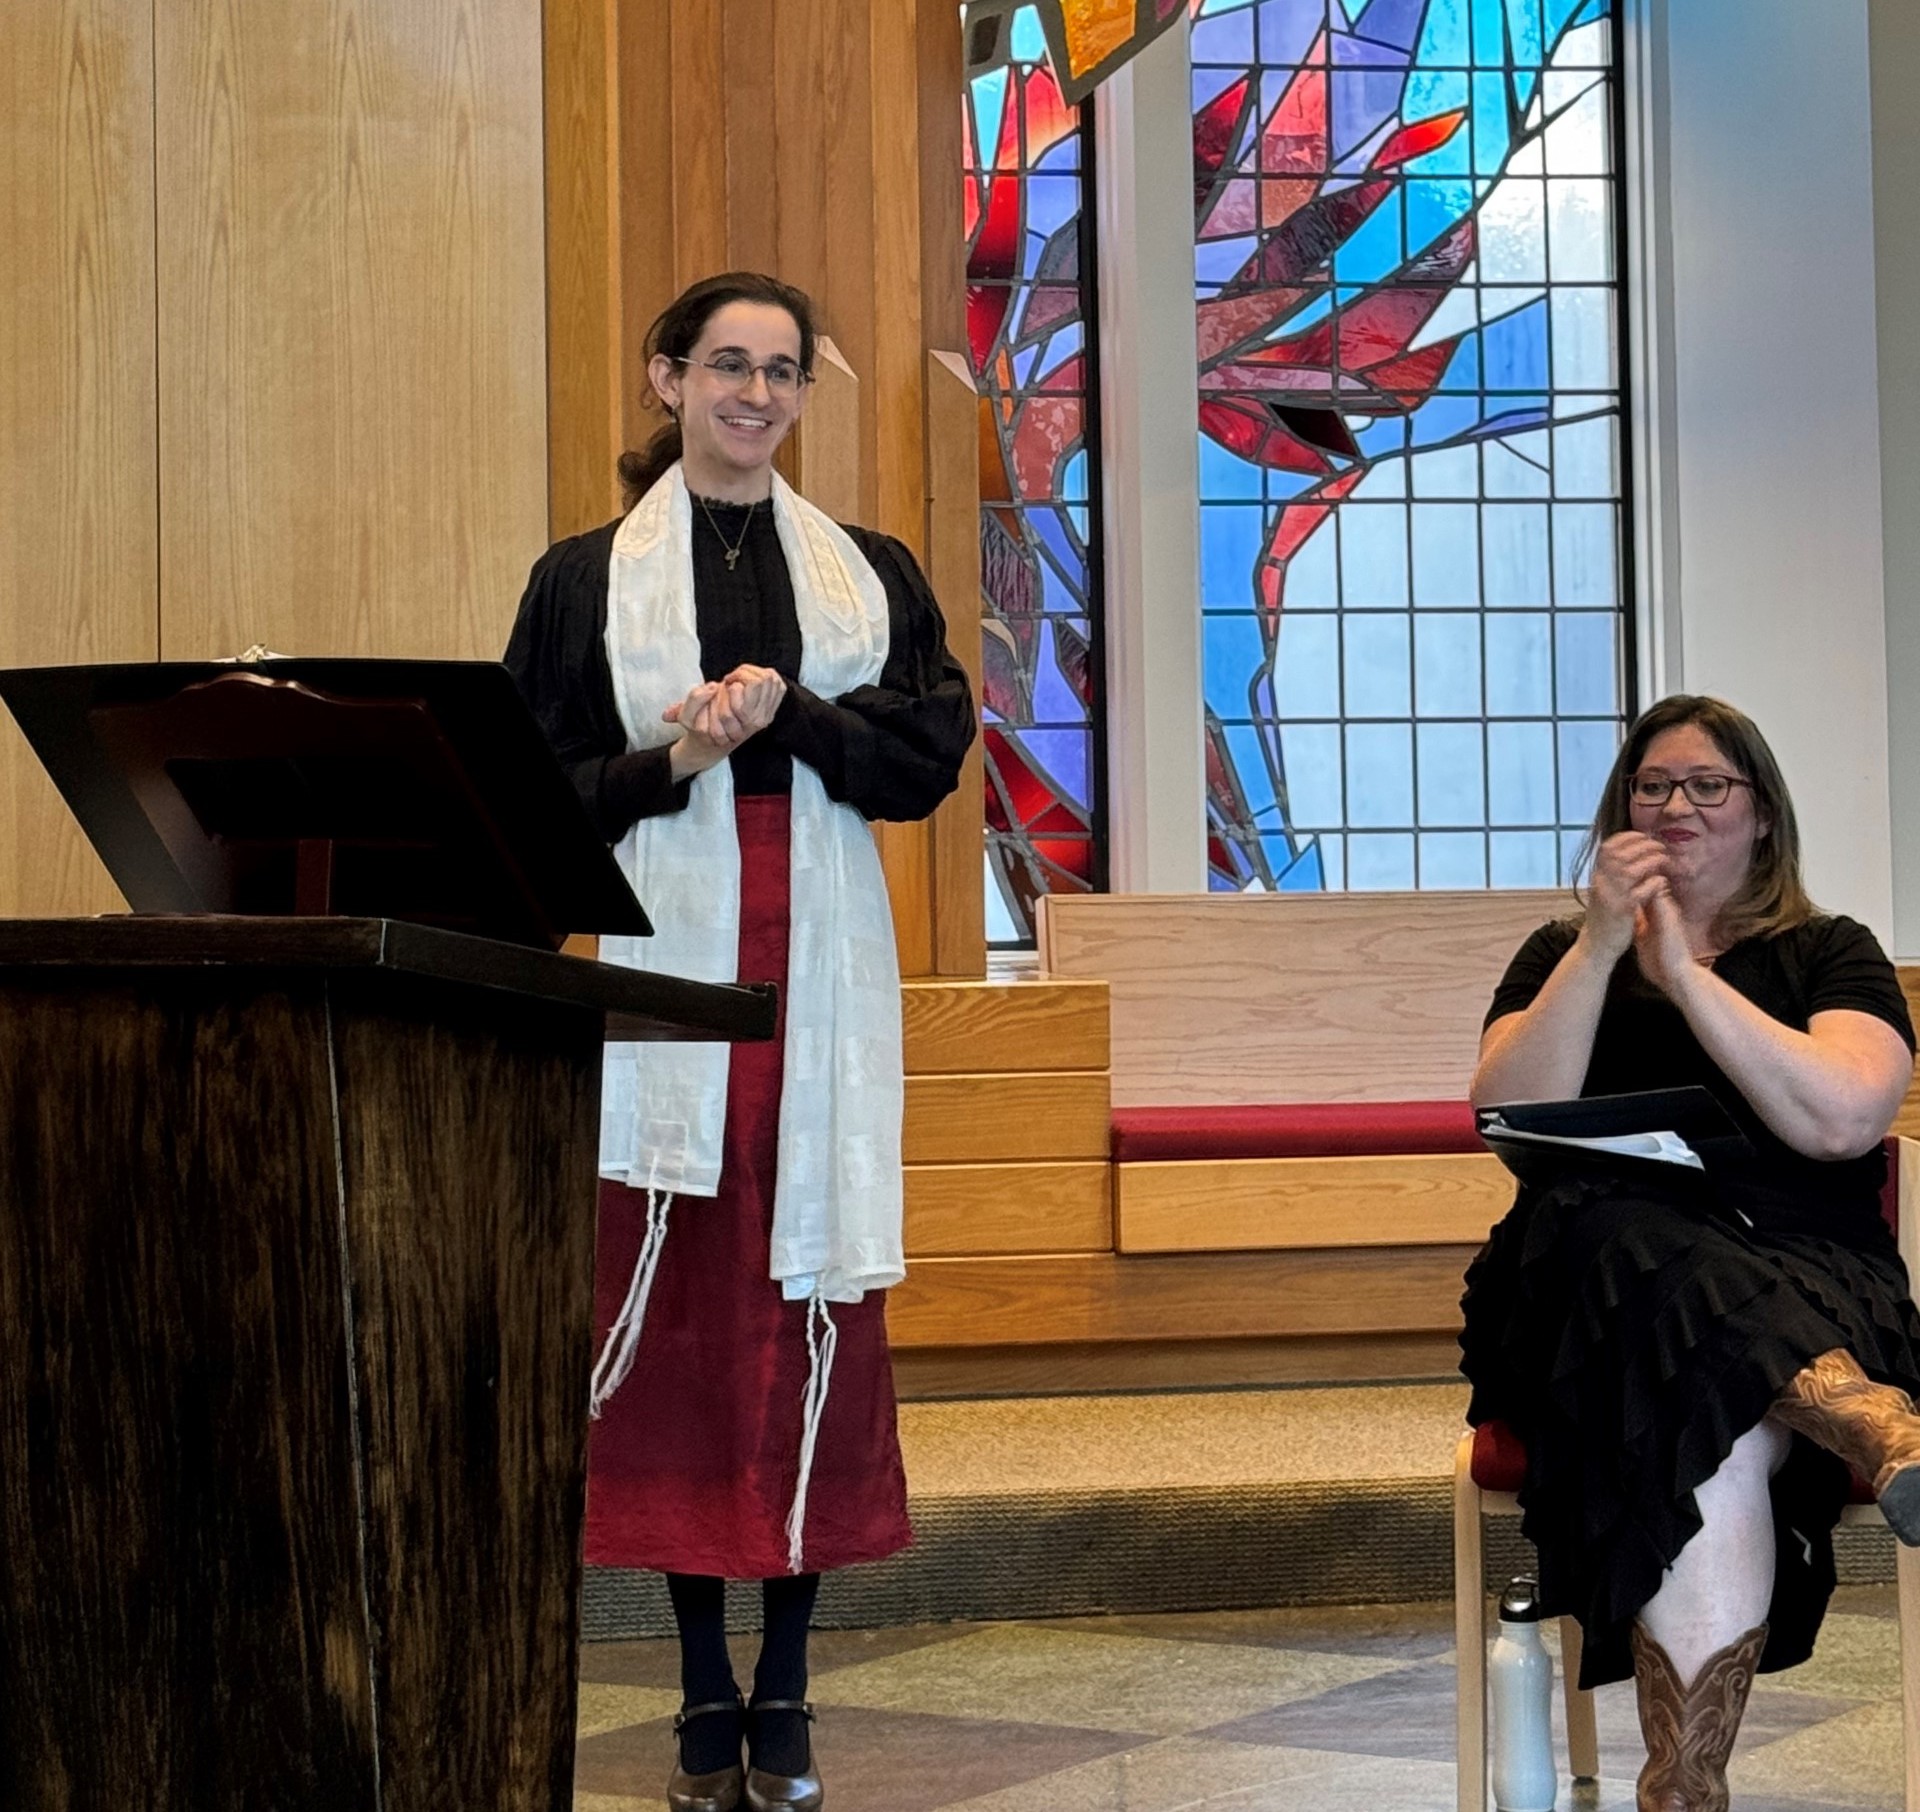 H. L. MILLER CANTORIAL SCHOOL STUDENT PERFORMS 